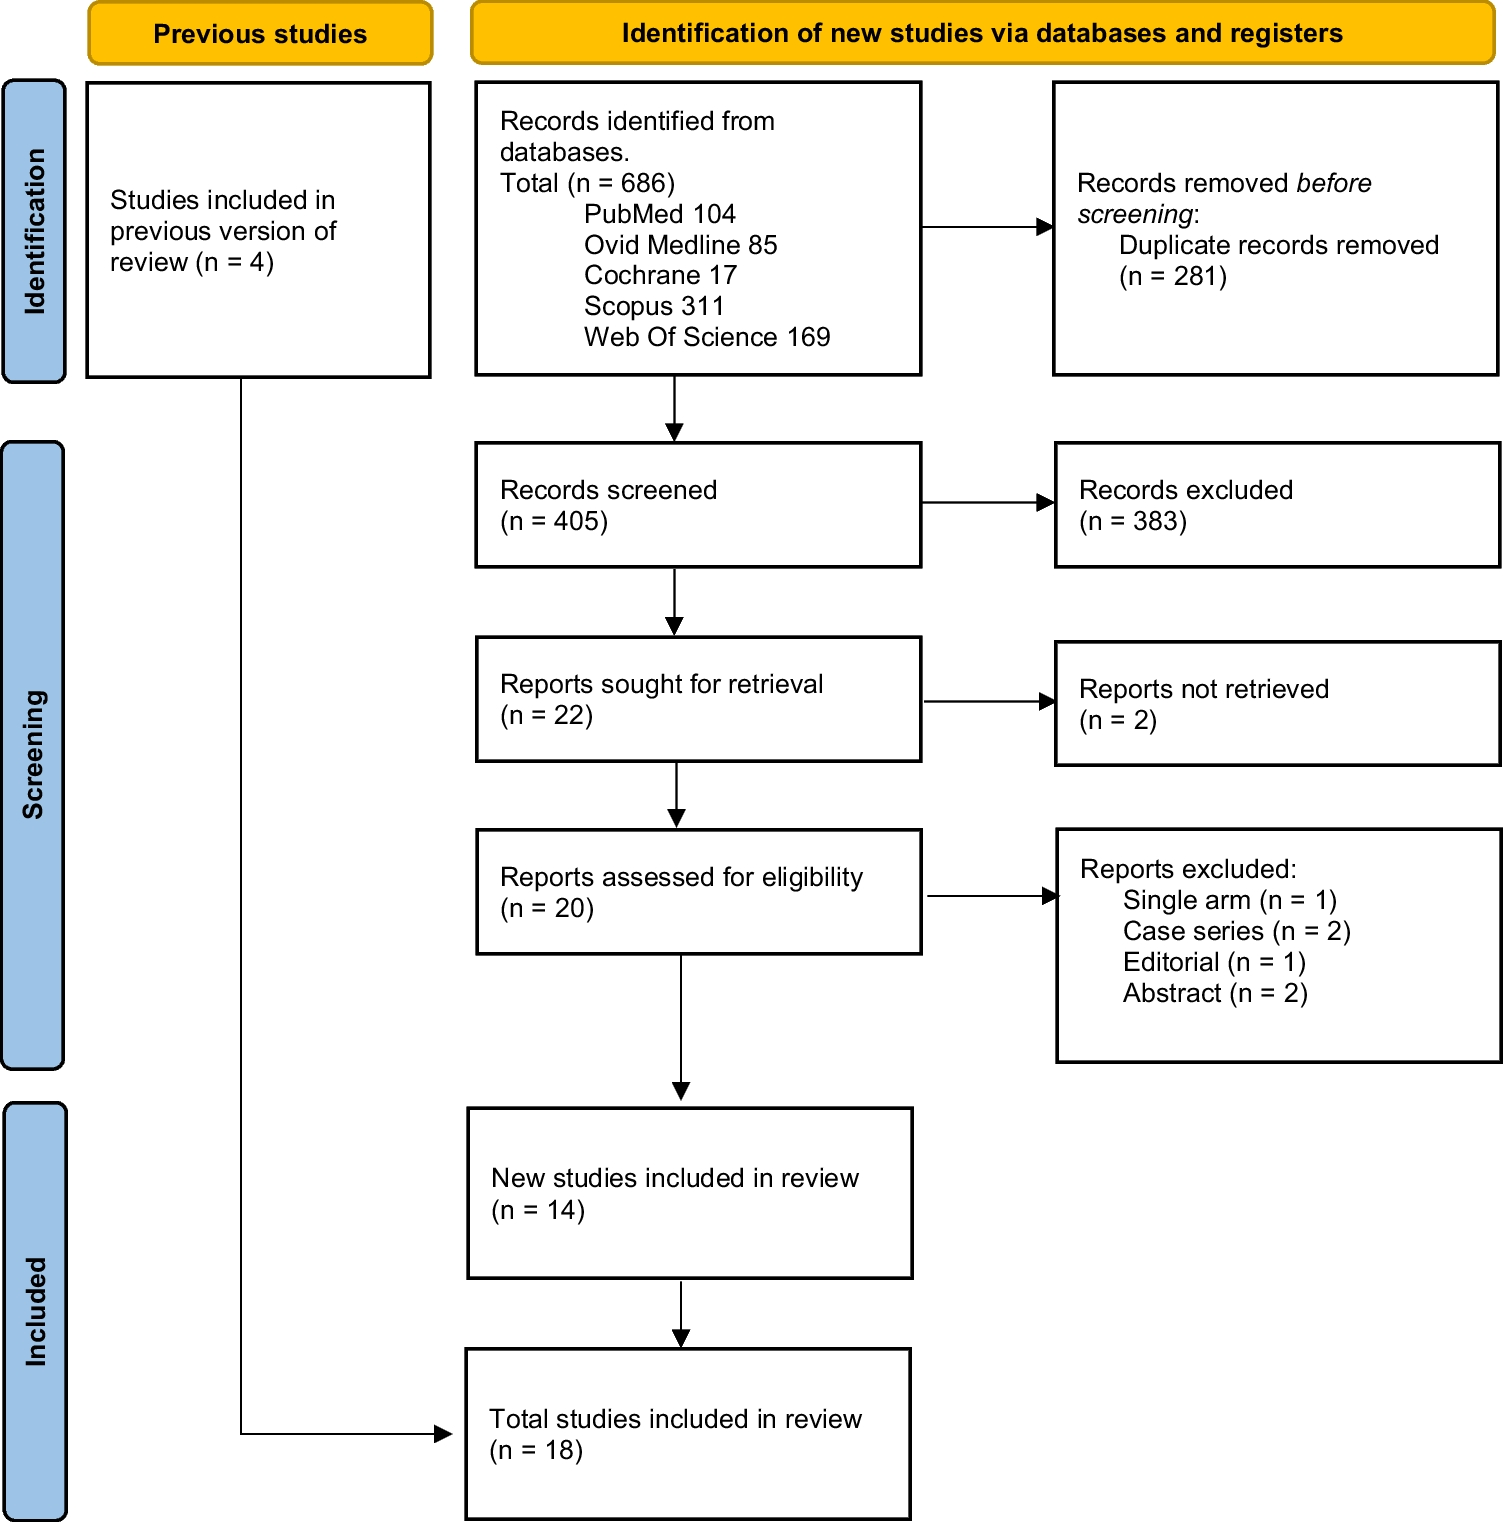 Local anesthesia with sedation and general anesthesia for the treatment of chronic subdural hematoma: a systematic review and meta-analysis